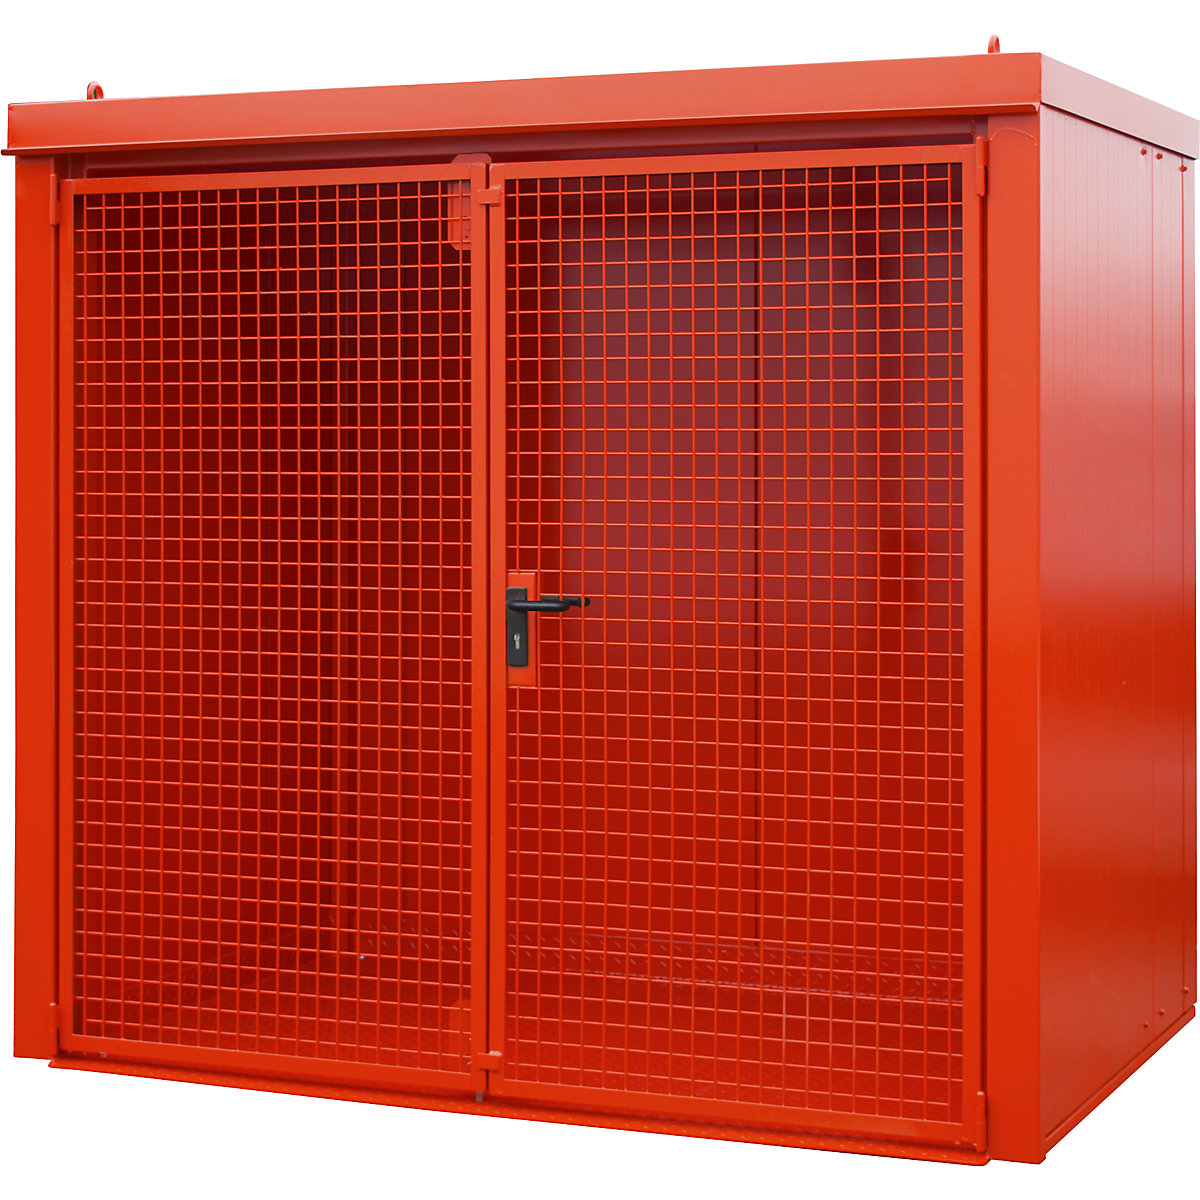 Gas cylinder container, fire resistant – eurokraft pro, for 45 cylinders with Ø 230 mm, red-2